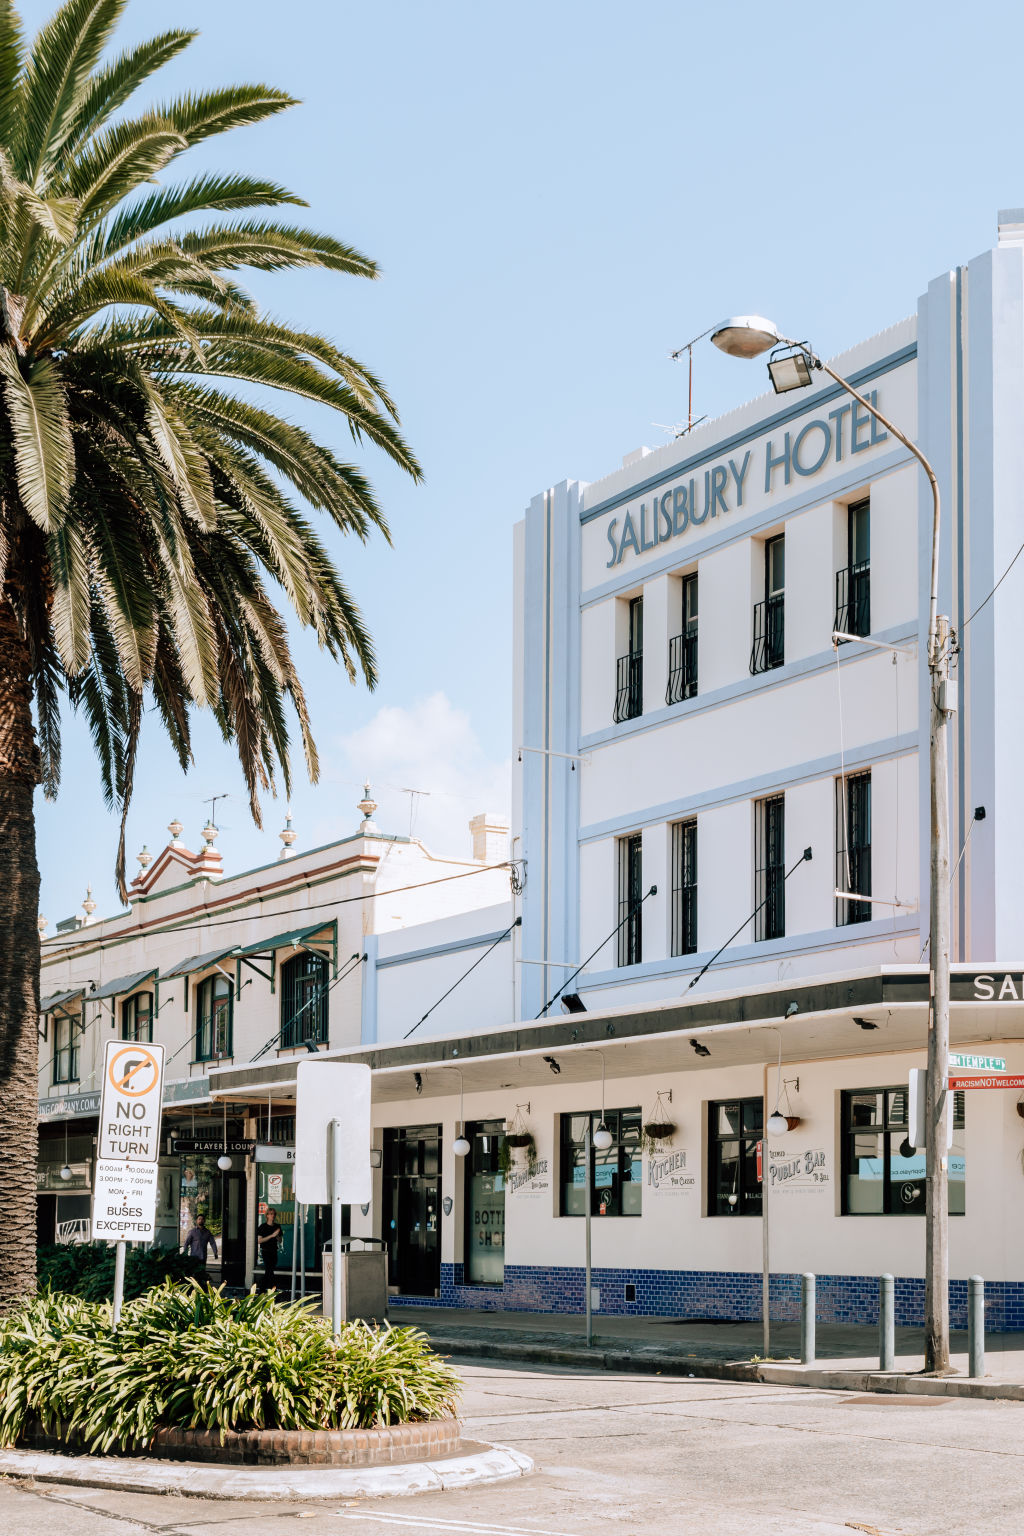 The recently renovated Salisbury Hotel has been a welcome facelift for the Percival Road shopping strip. Photo: Vaida Savickaite